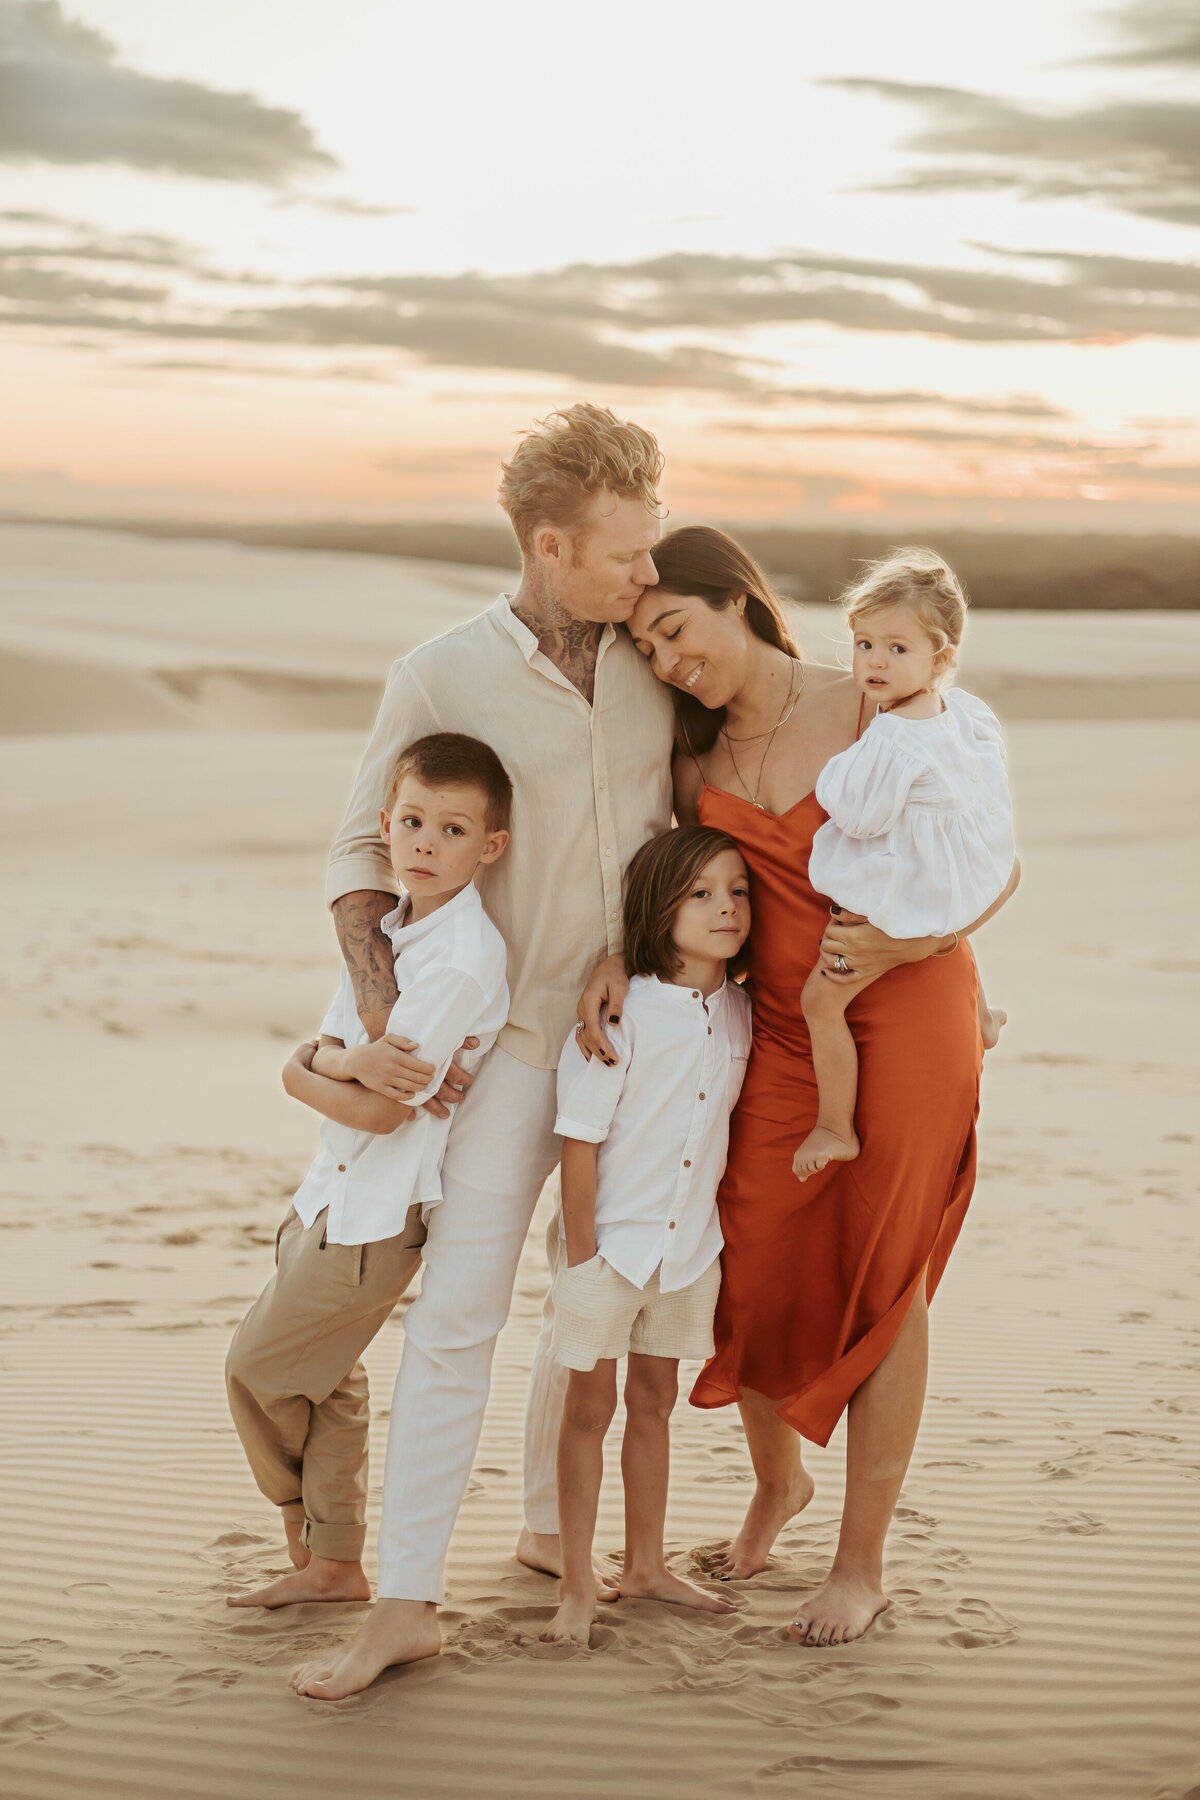 Gorgeous Sydney family of five posing together on the sand at sunset.